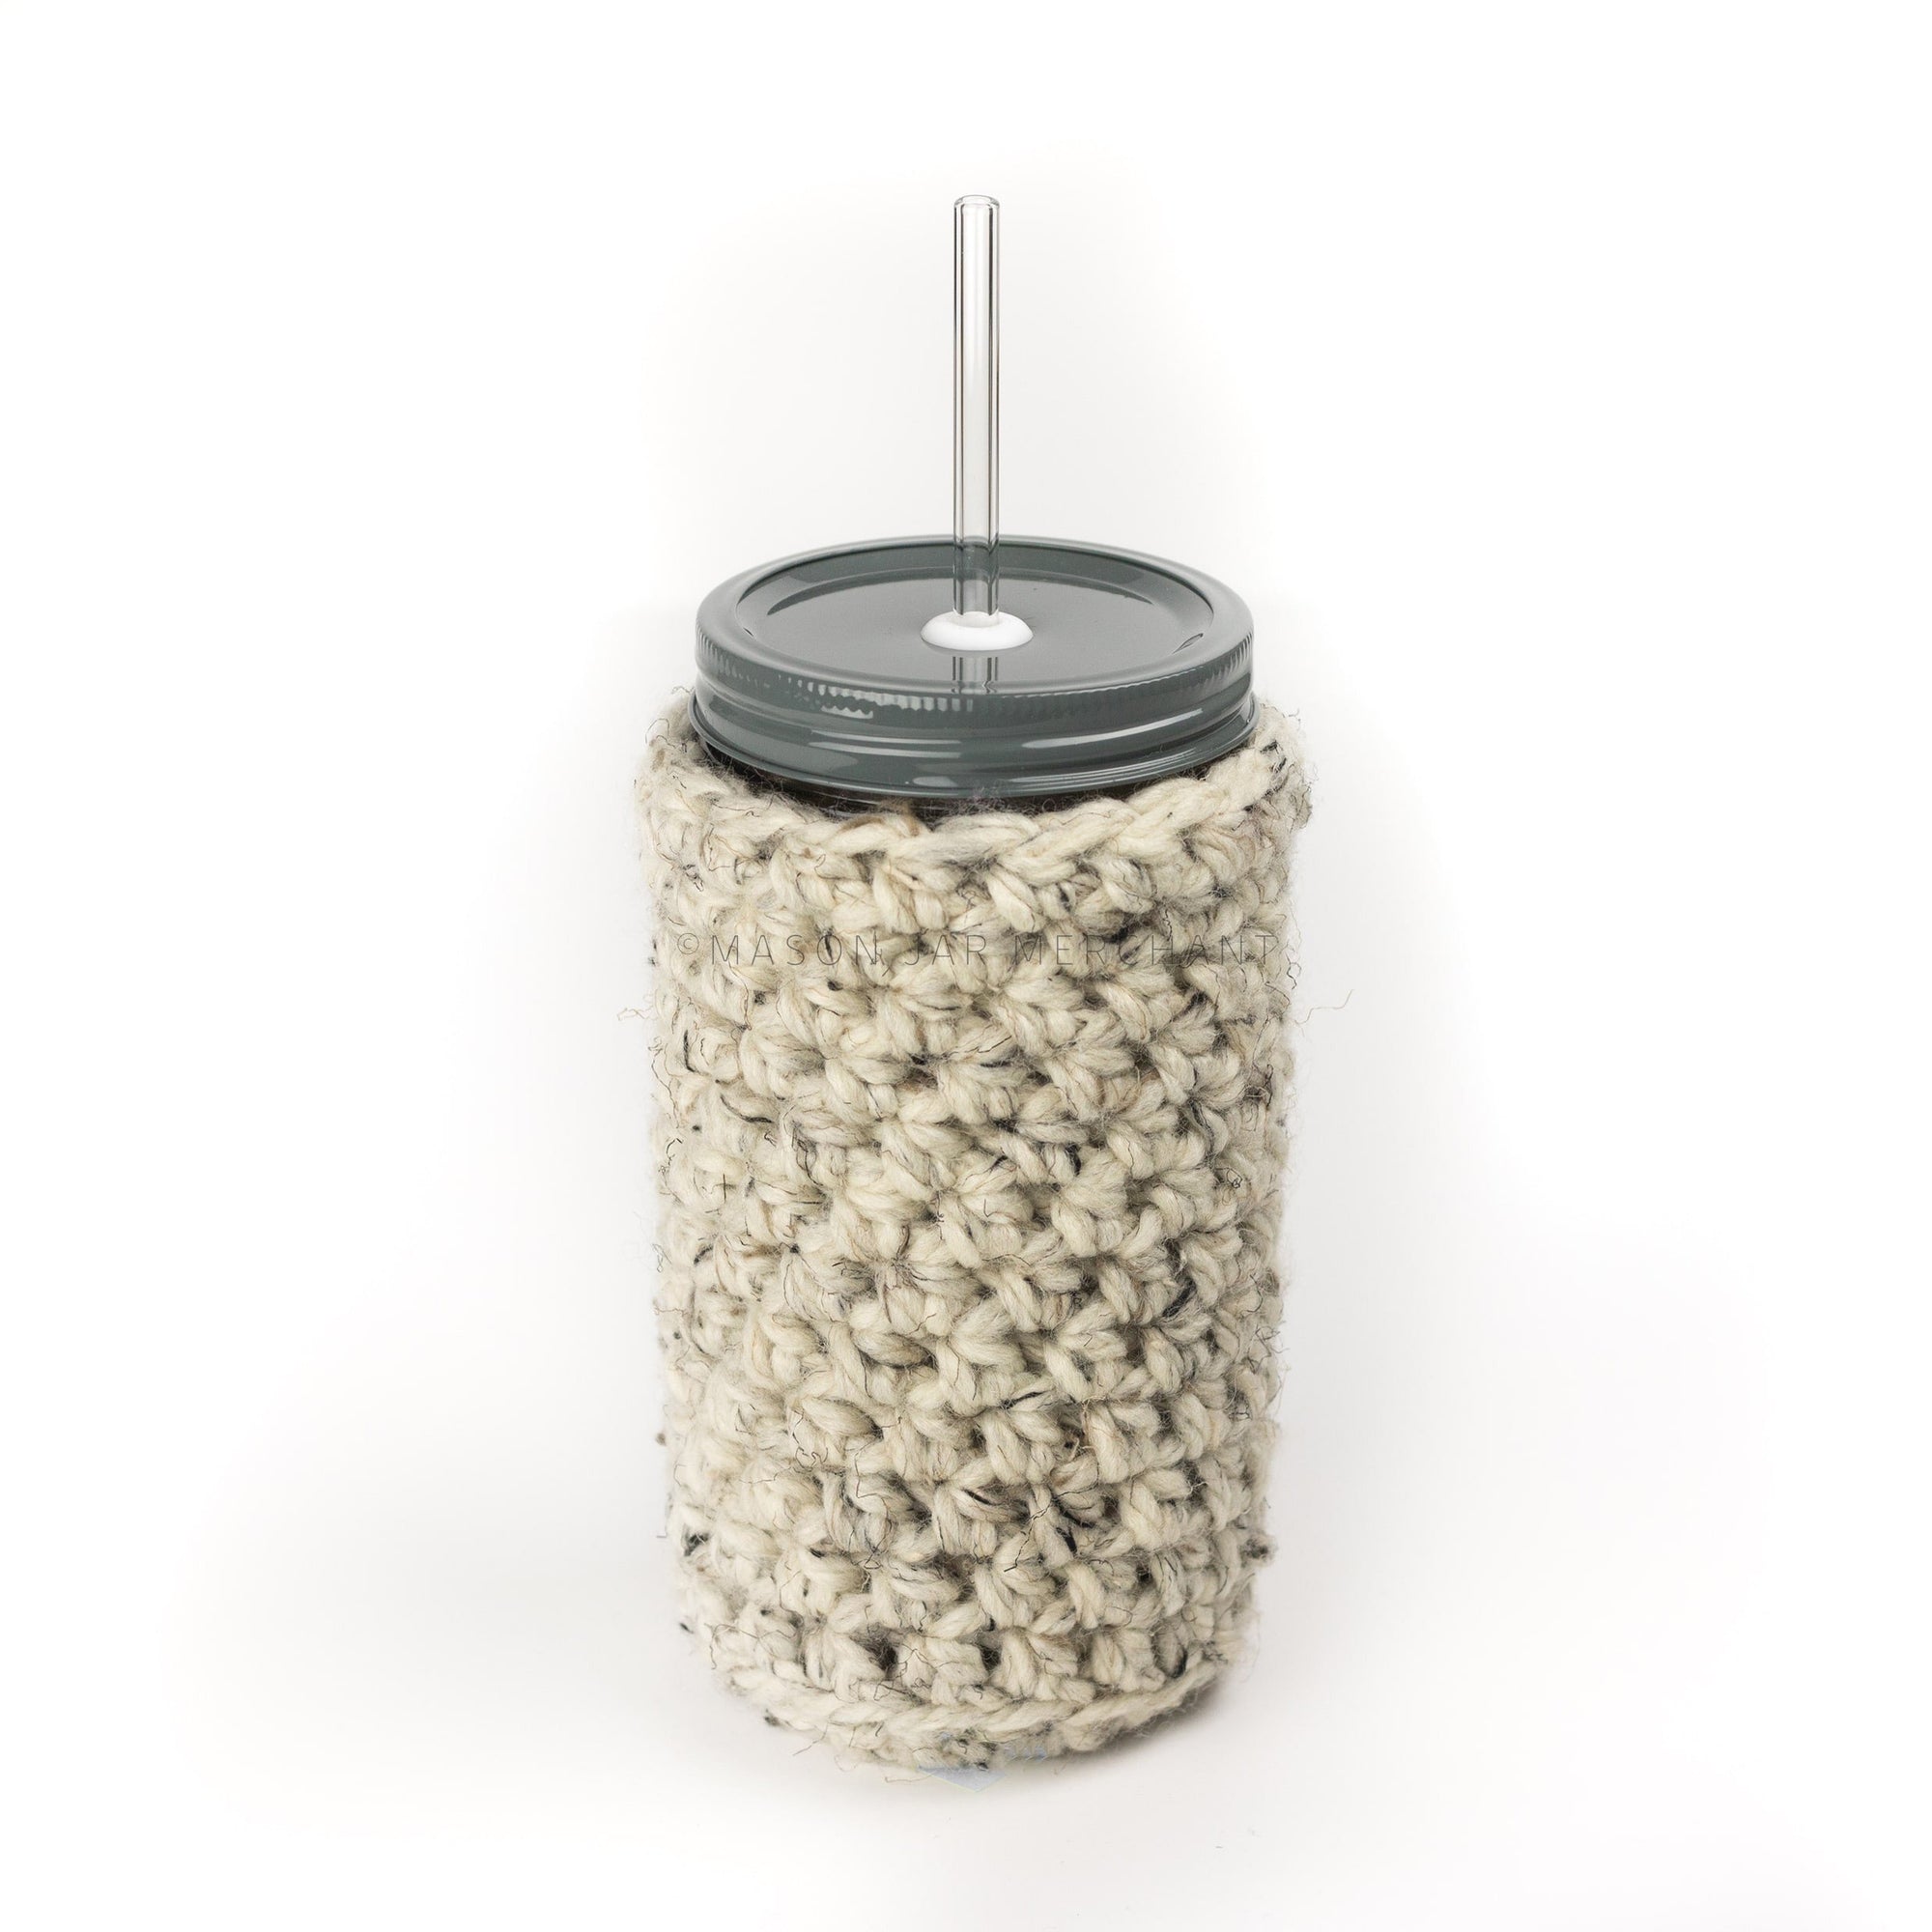 24 oz reusable glass mason jar tumbler with an all grey straw lid and a glass reusable straw. An off white knit cozy with flex of beige and black covers the jar